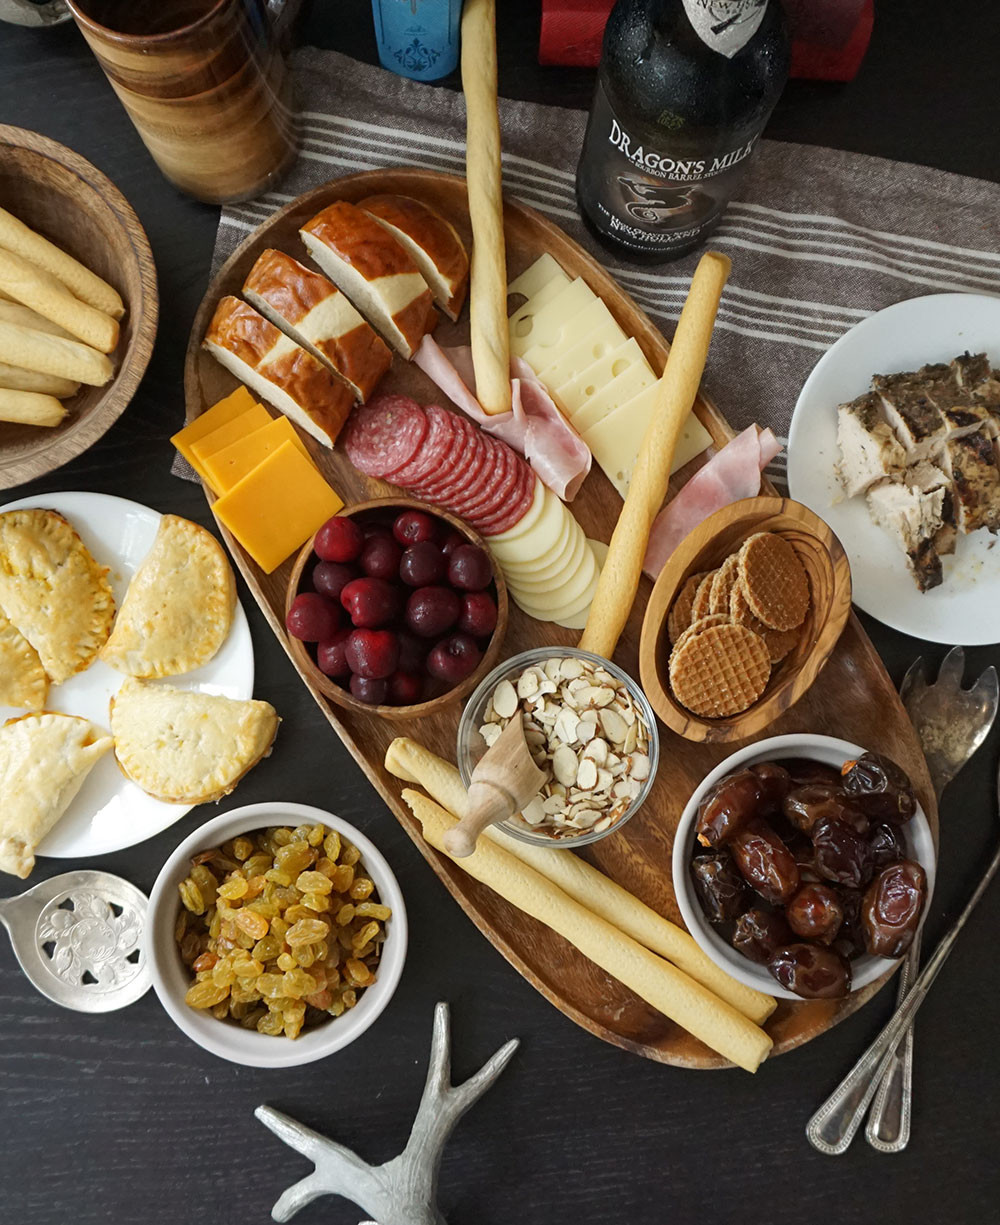 Game Of Thrones Party Food Ideas
 Dinner is ing A Game of Thrones menu for your premiere